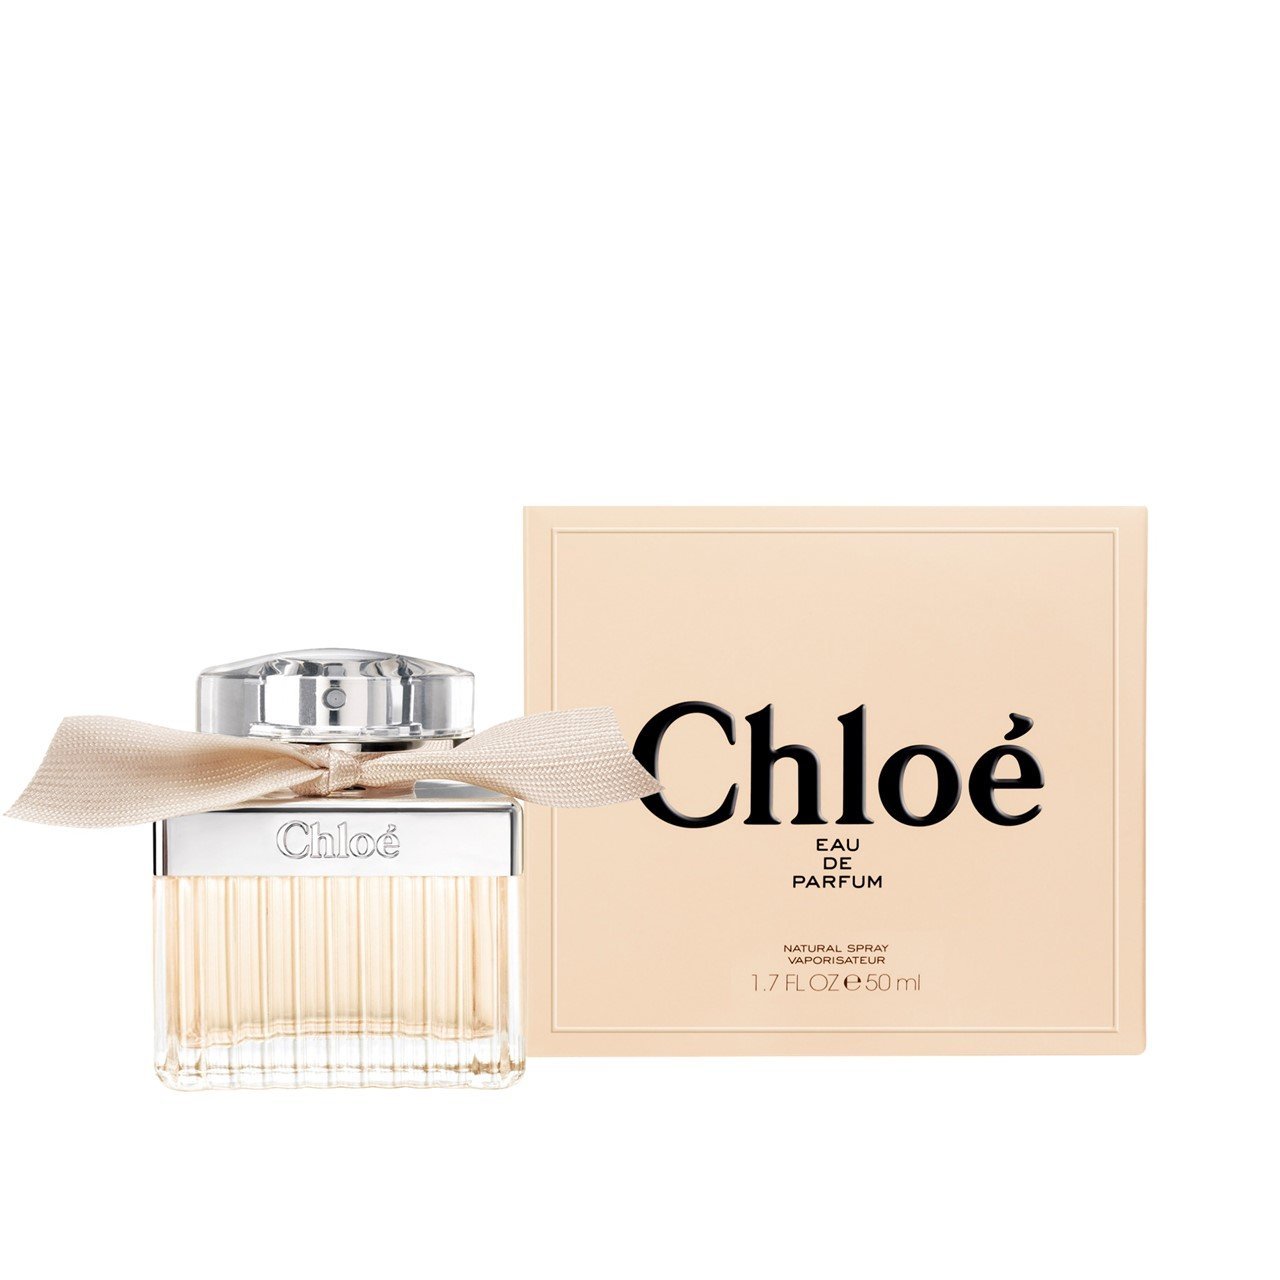 Chloe Products